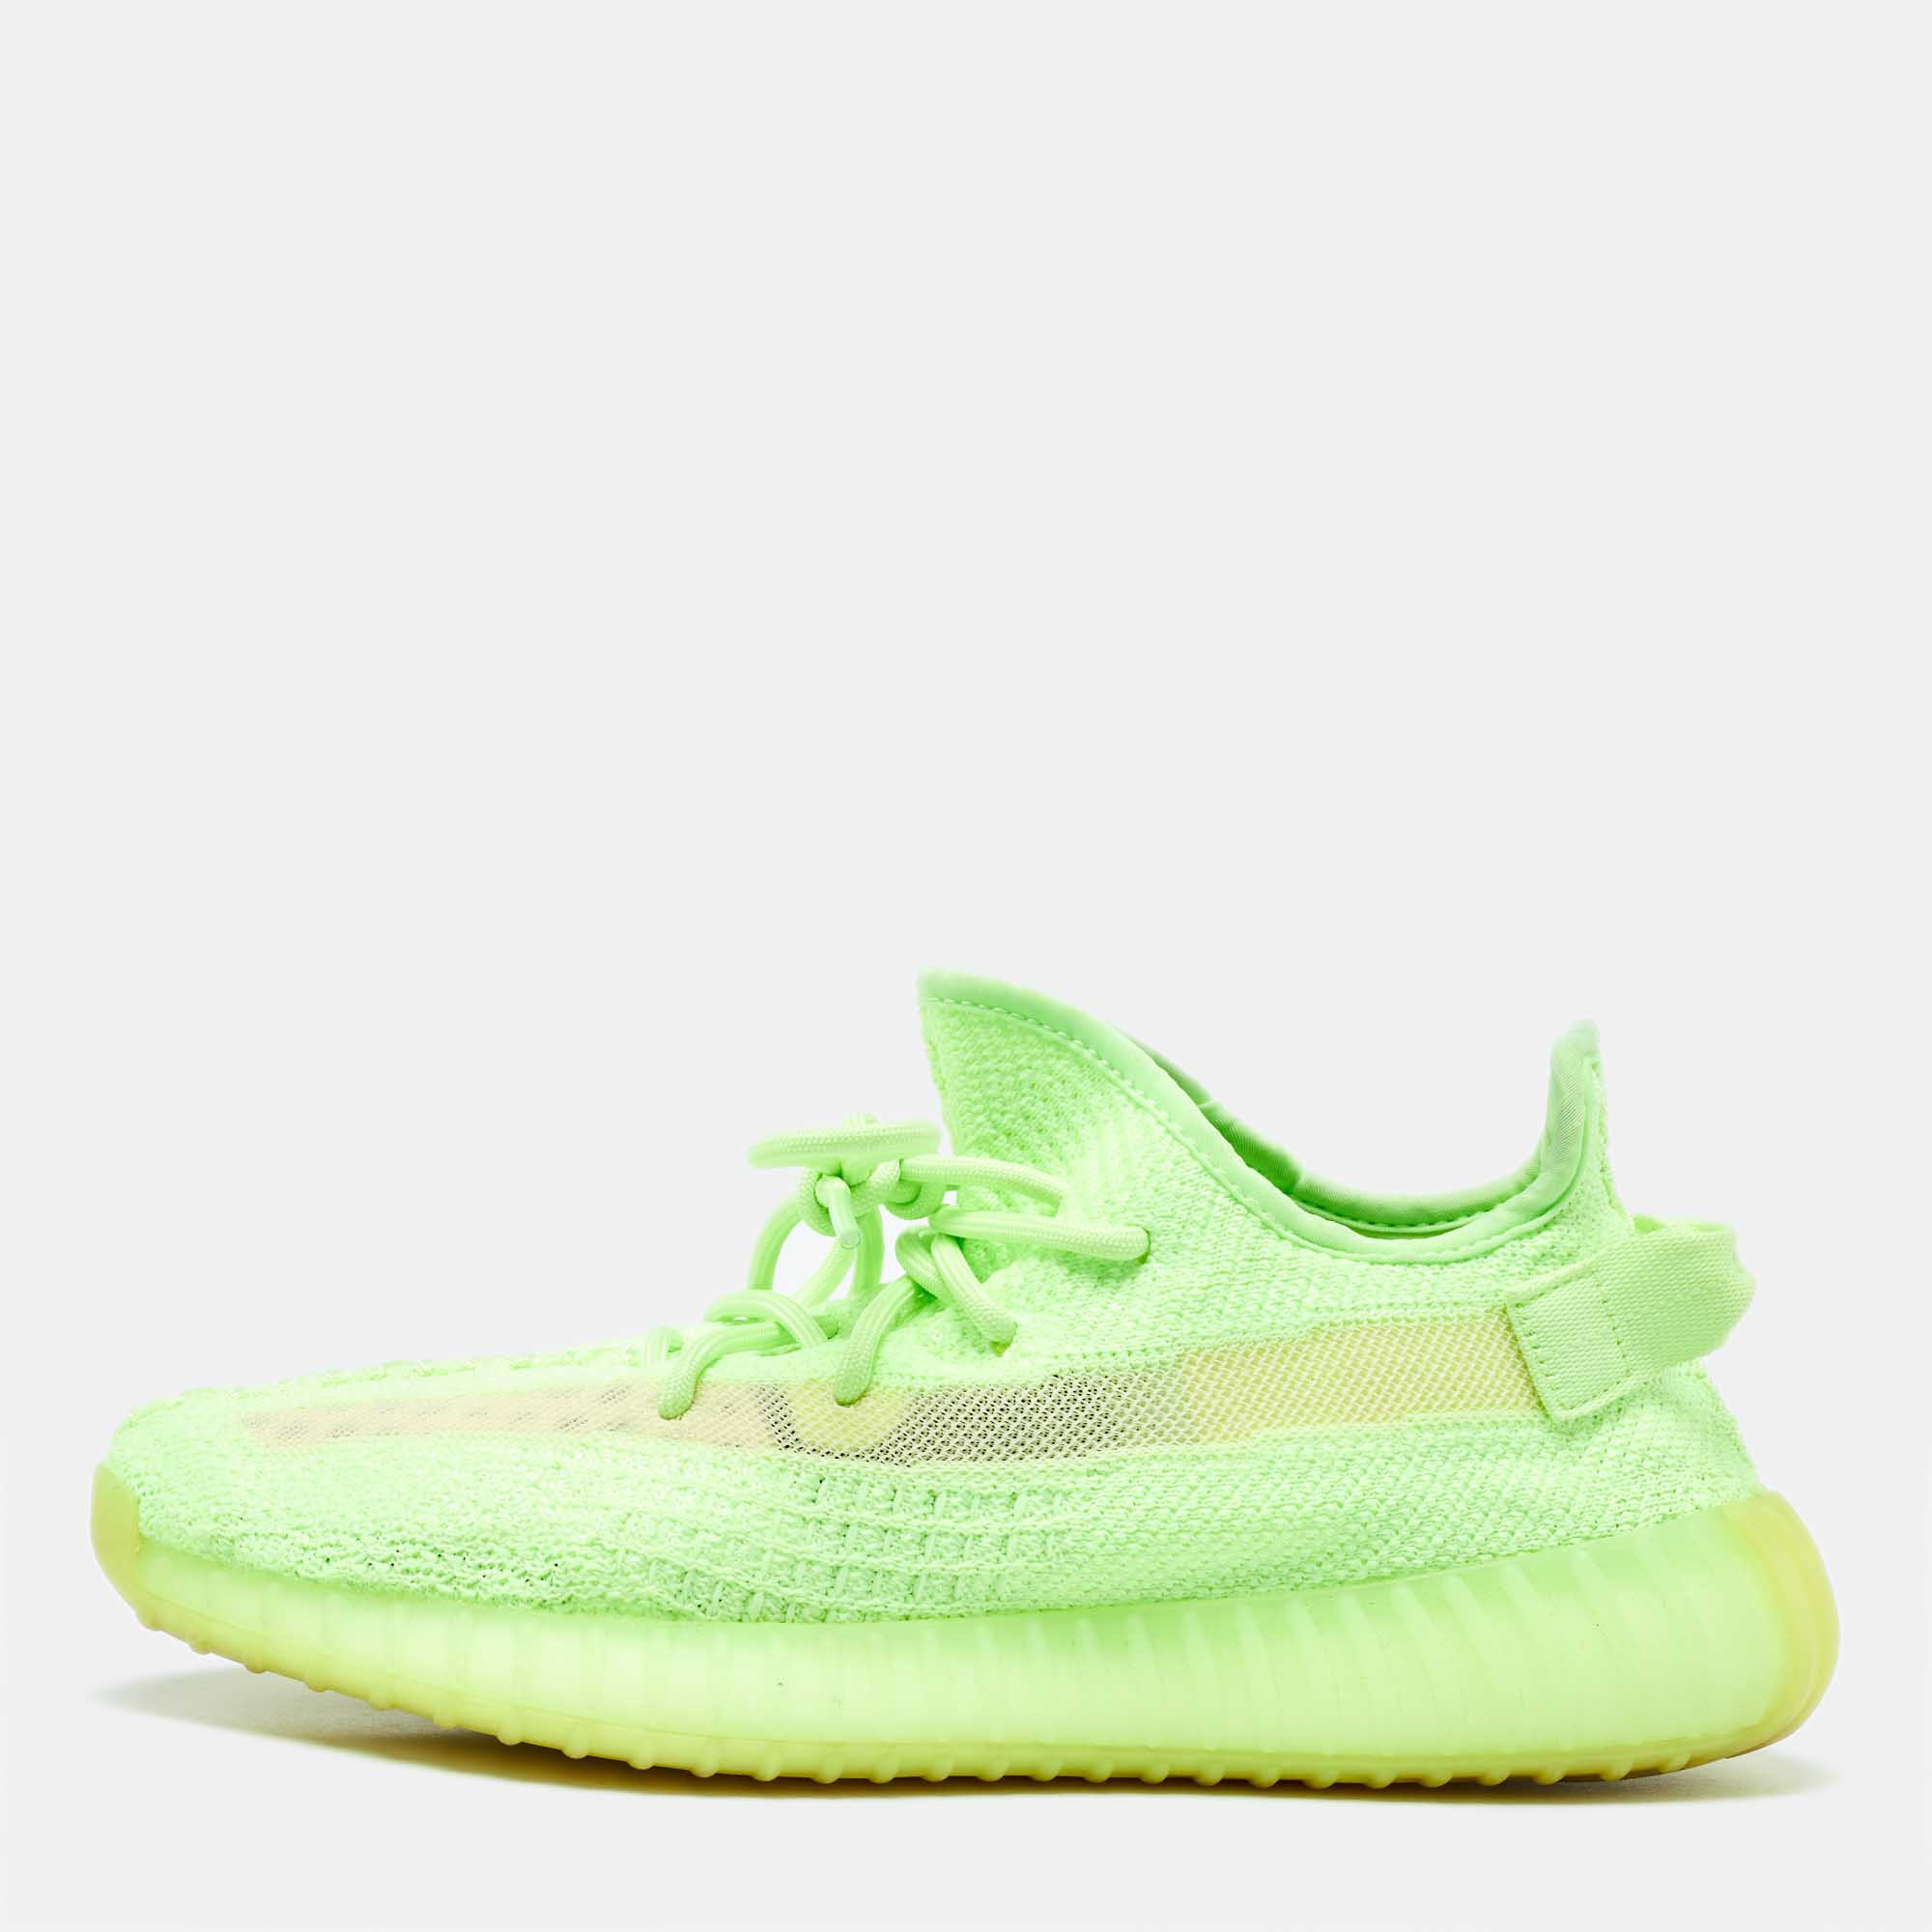 Yeezy x adidas green knit fabric boost 350 v2 "gid' glow sneakers size 41.5